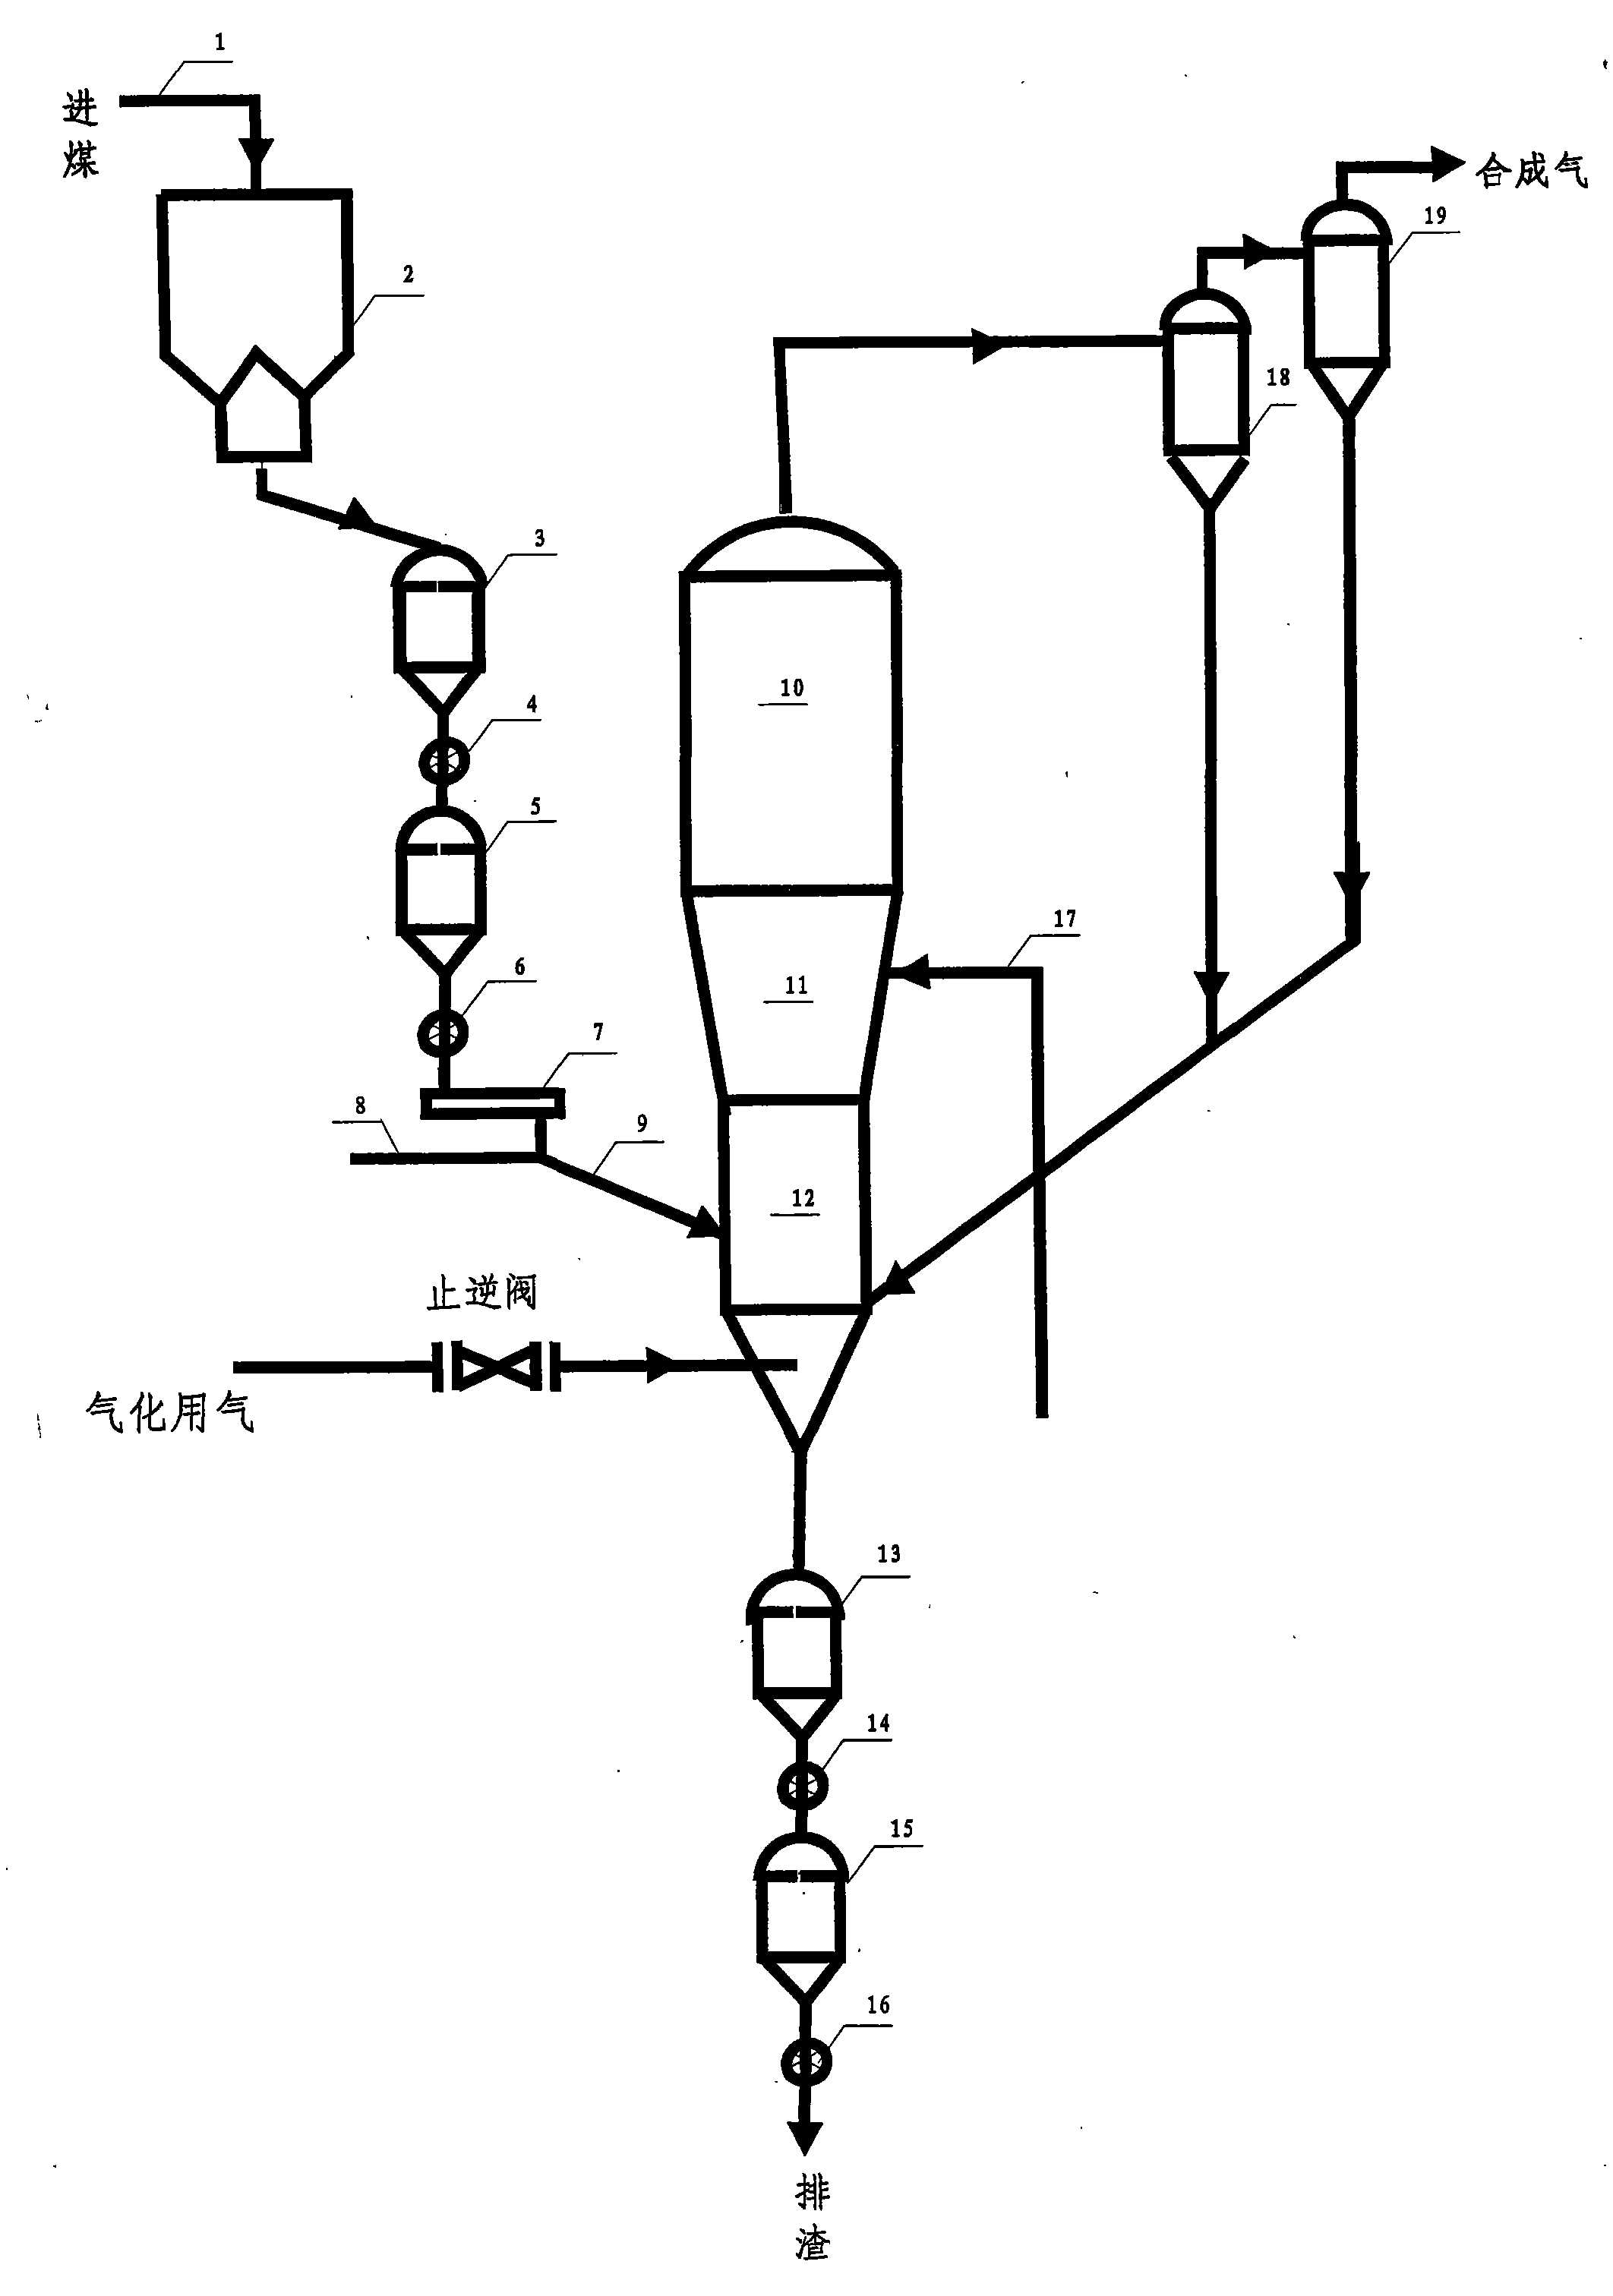 Rapidly-opened/closed check valve device for gas pipeline